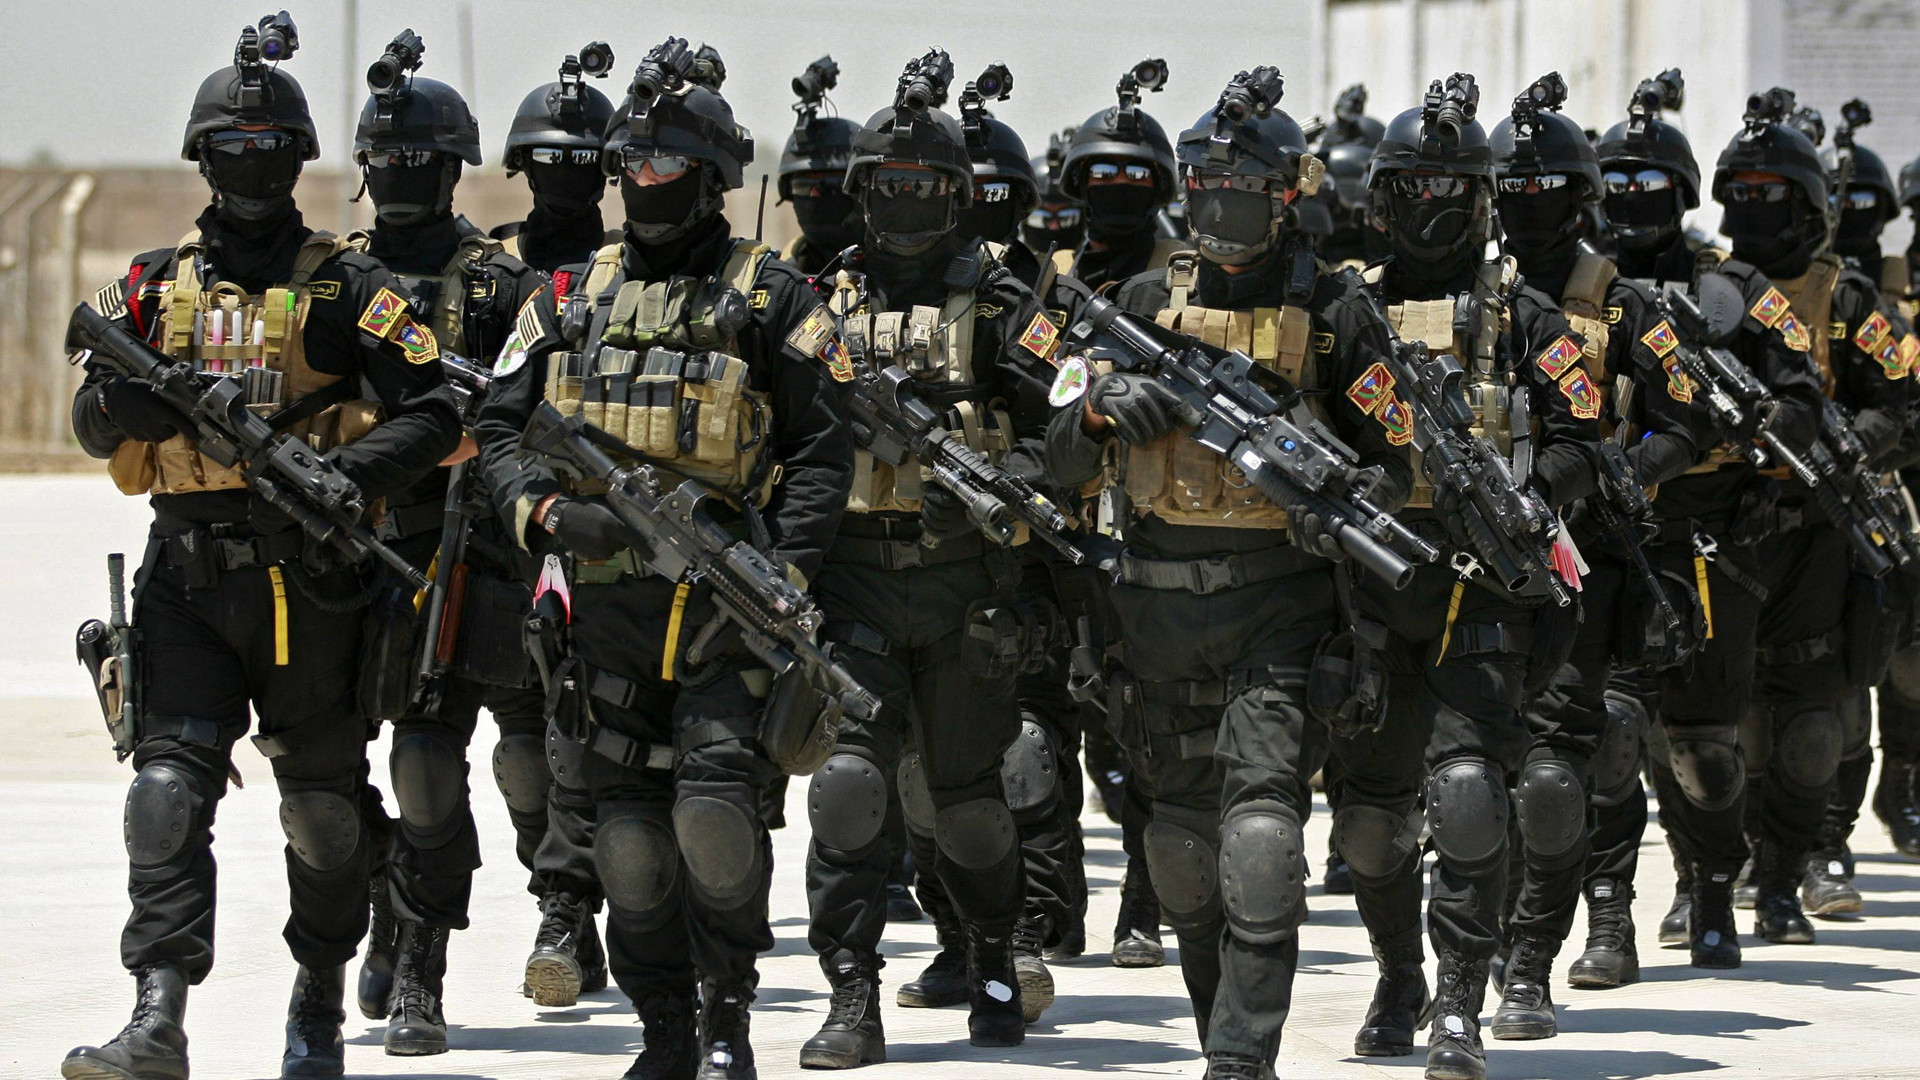 1920x1080 Iraqi Special Forces.